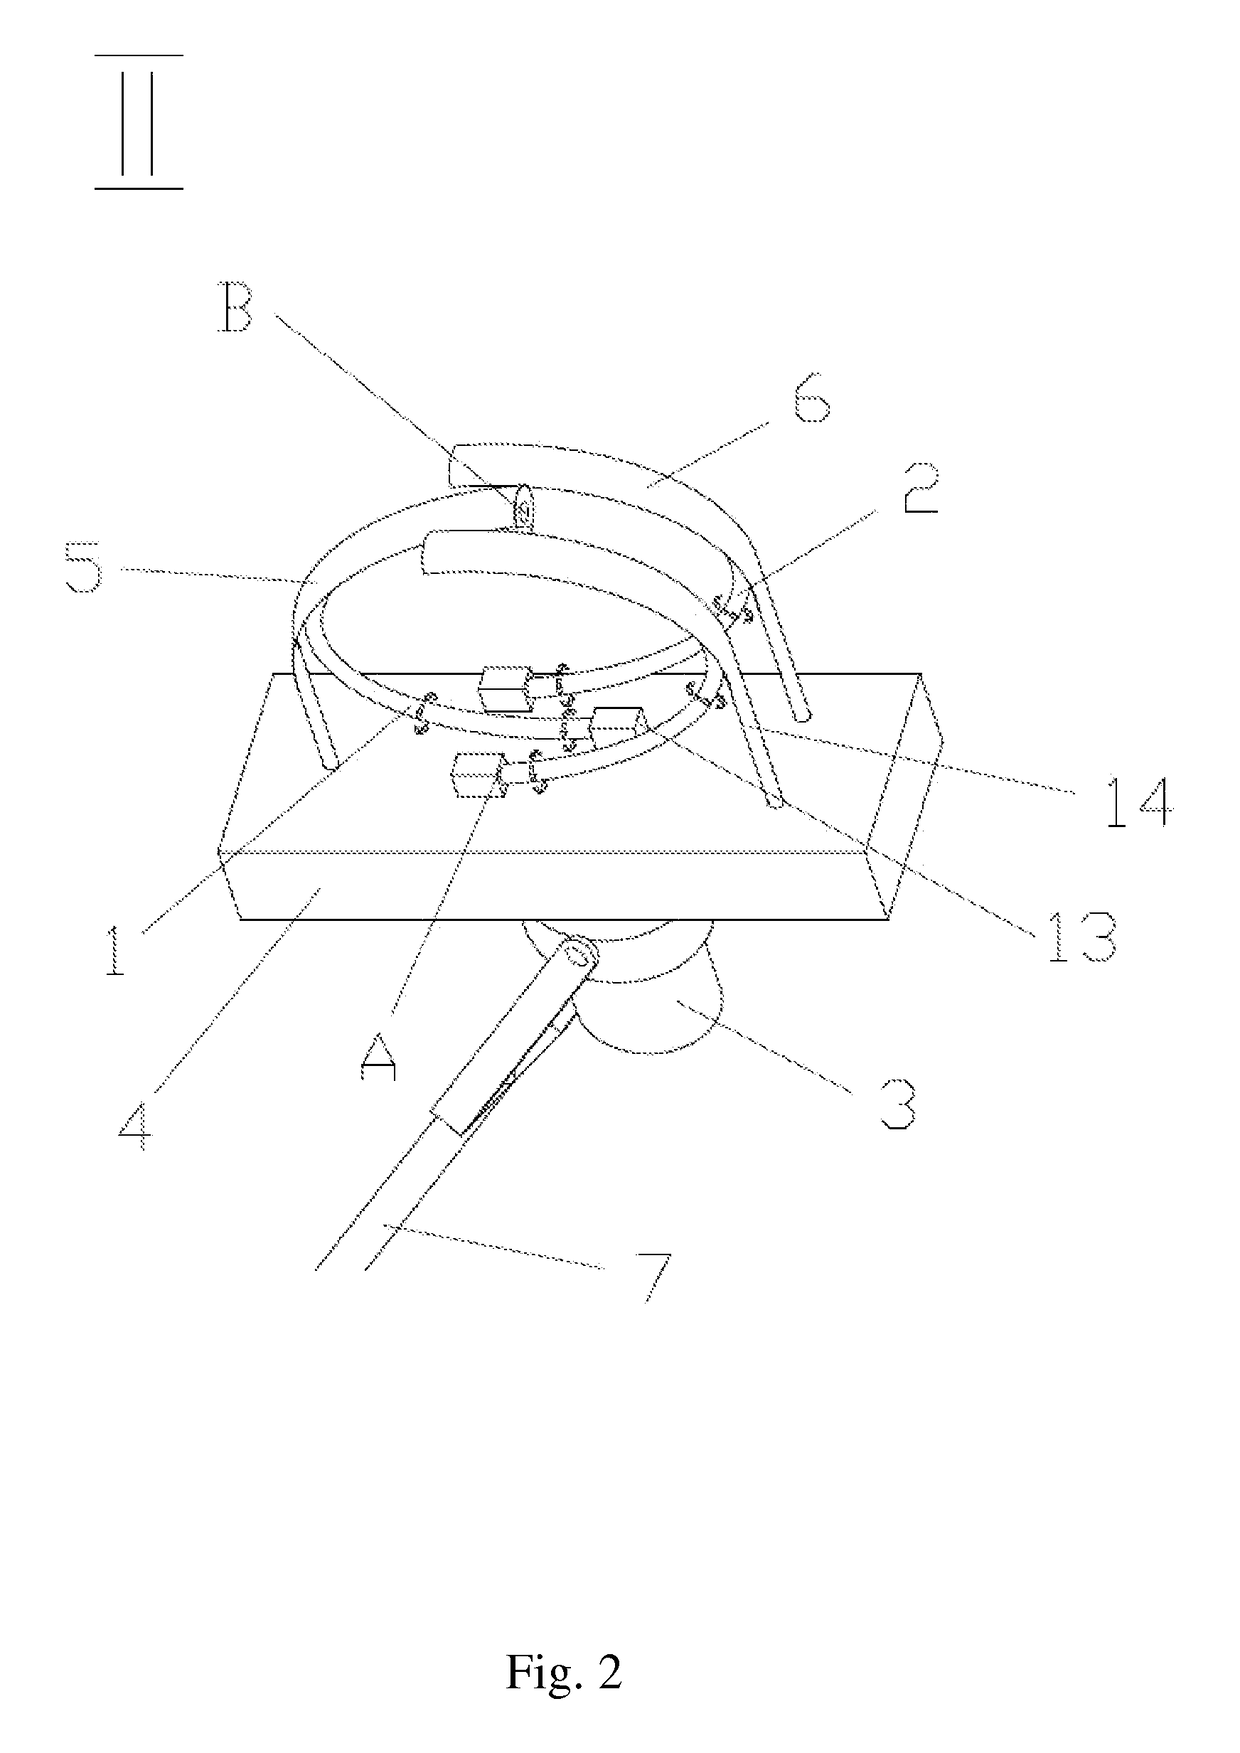 Apparatus for applying a coating to the surface of cylindrical articles